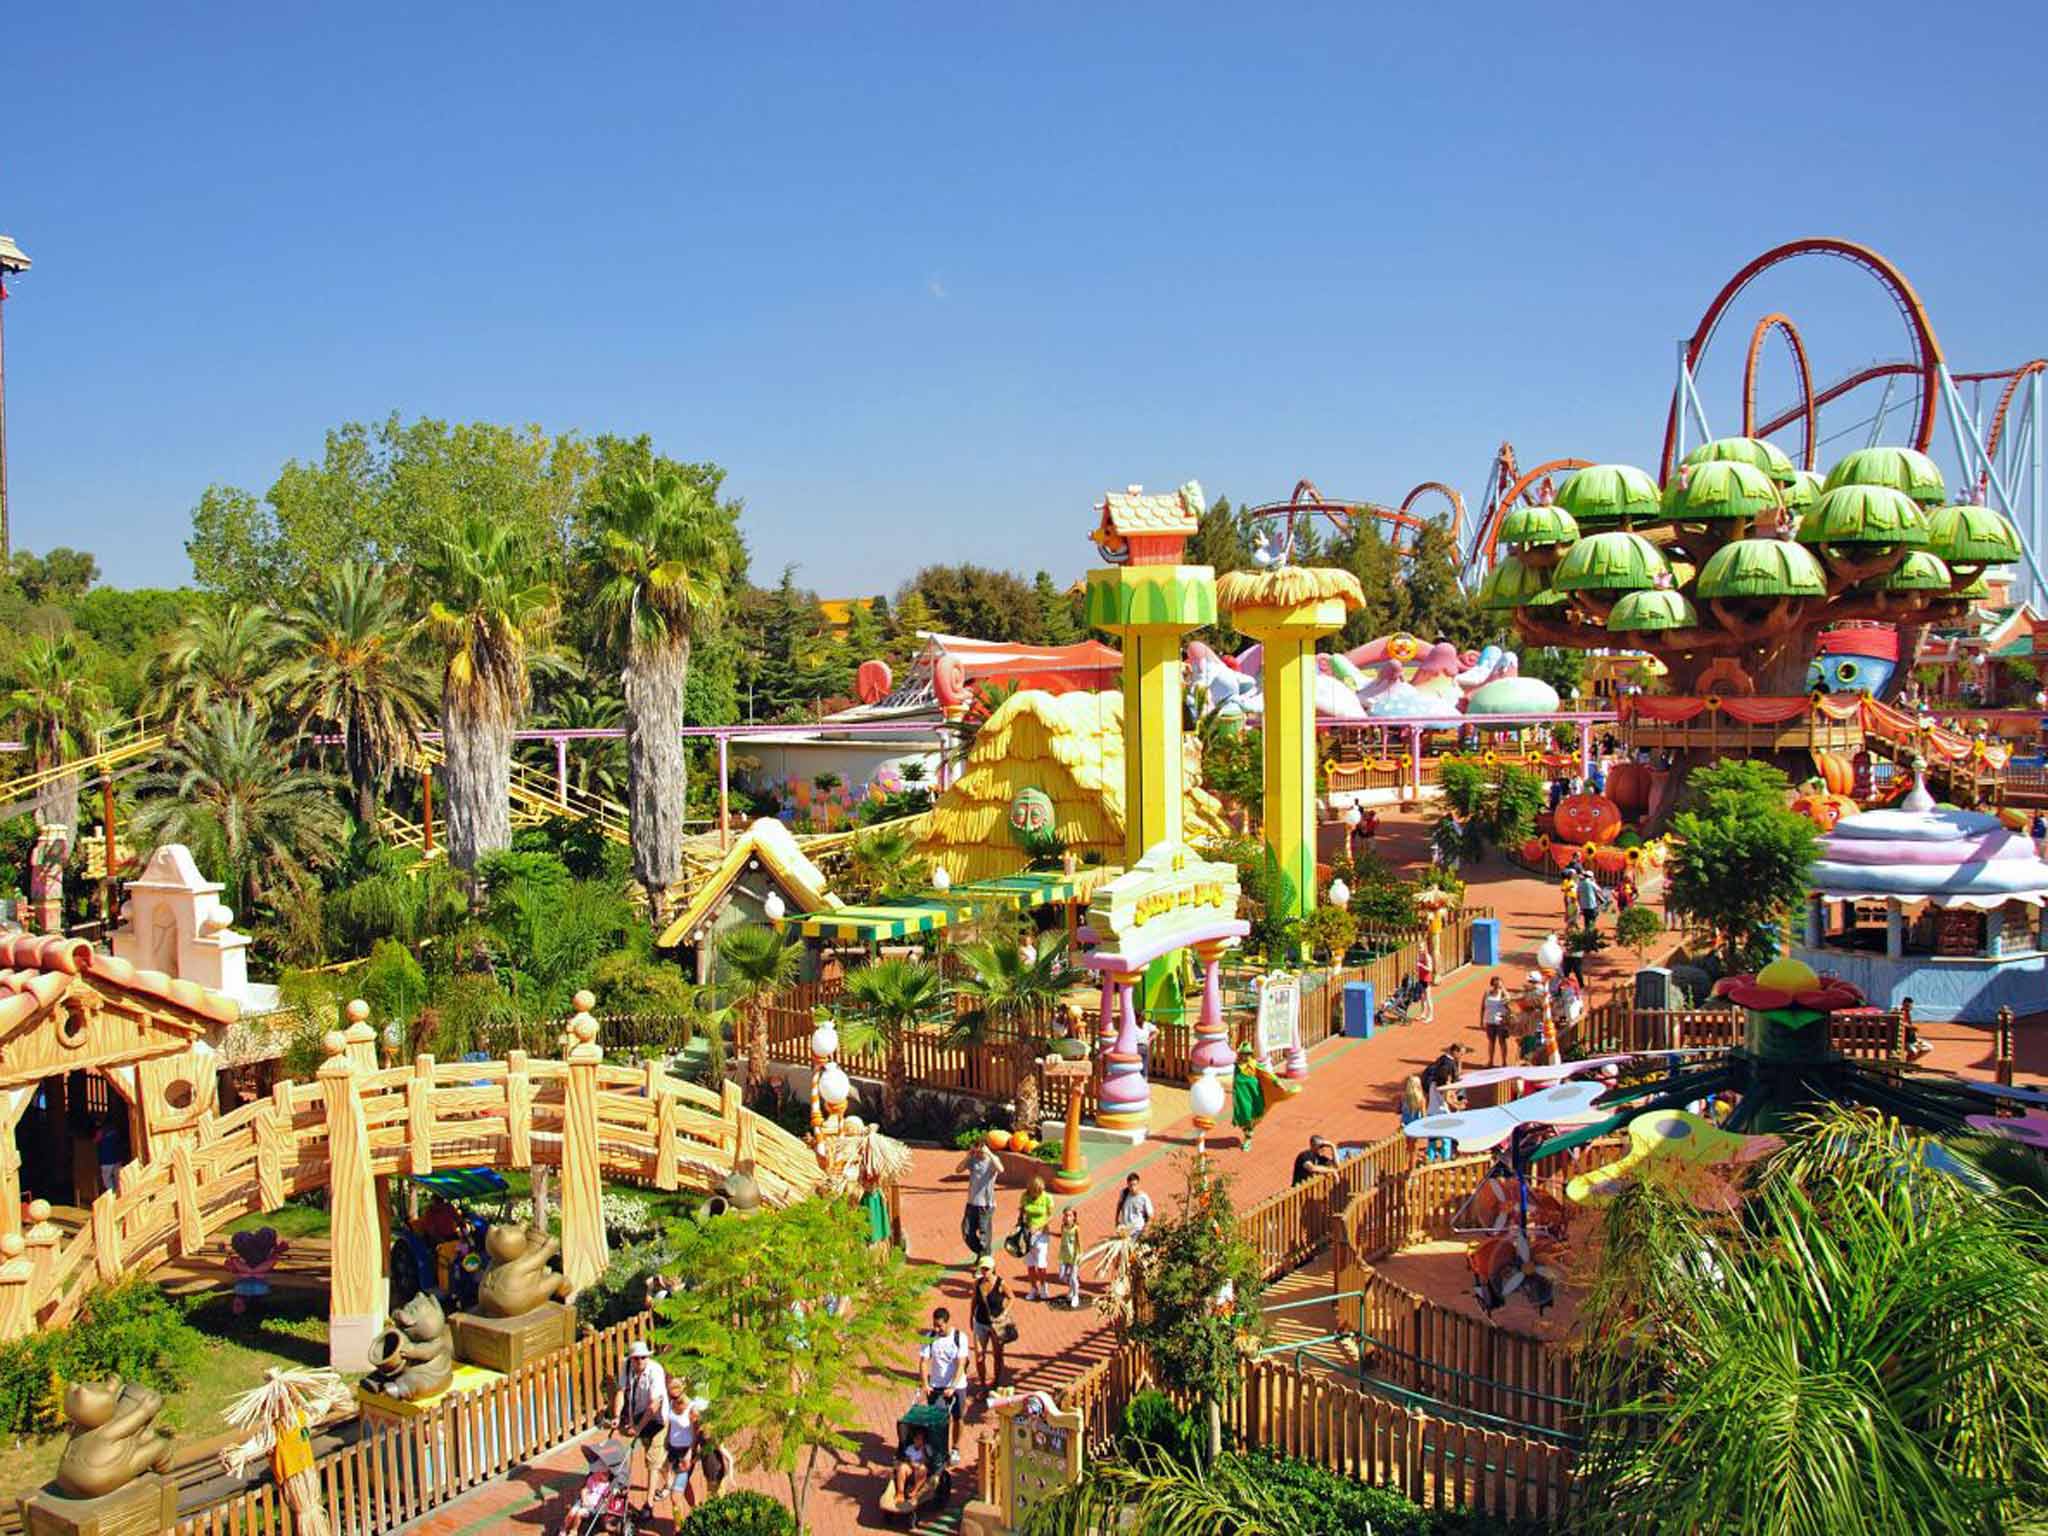 How to get to portaventura park from Barcelona